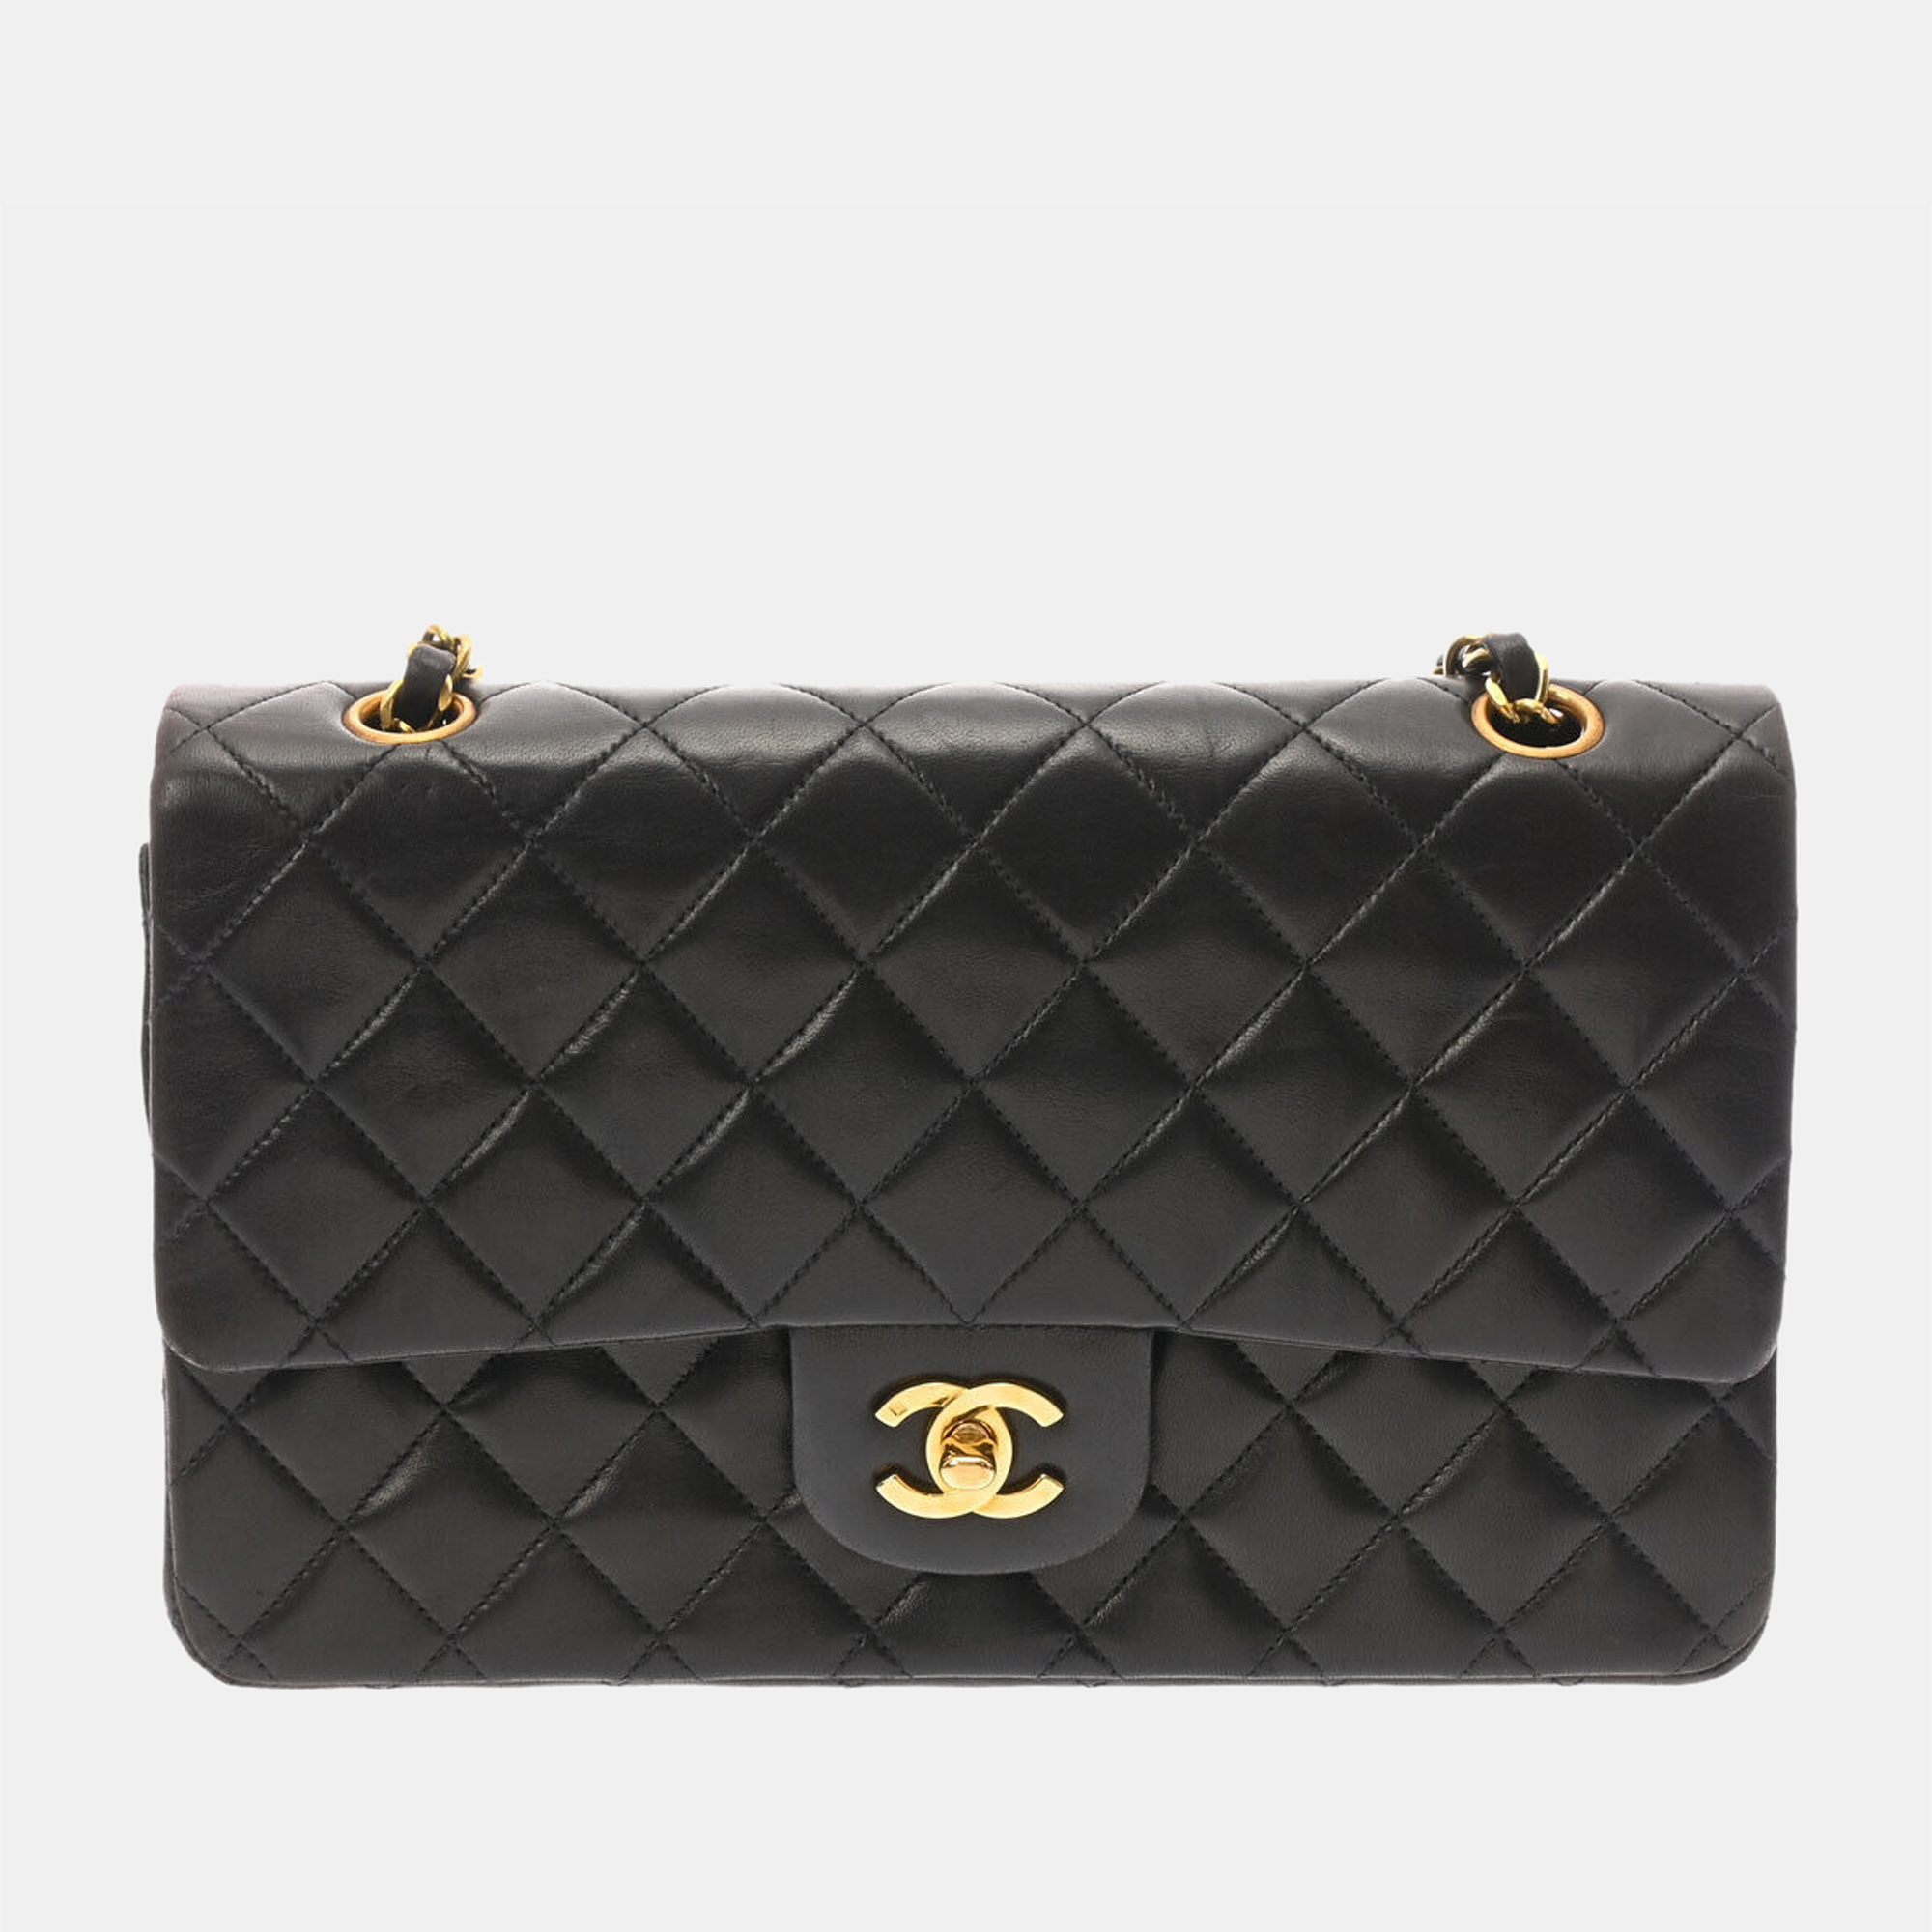 Pre-owned Chanel Black Lambskin Leather Medium Classic Double Flap